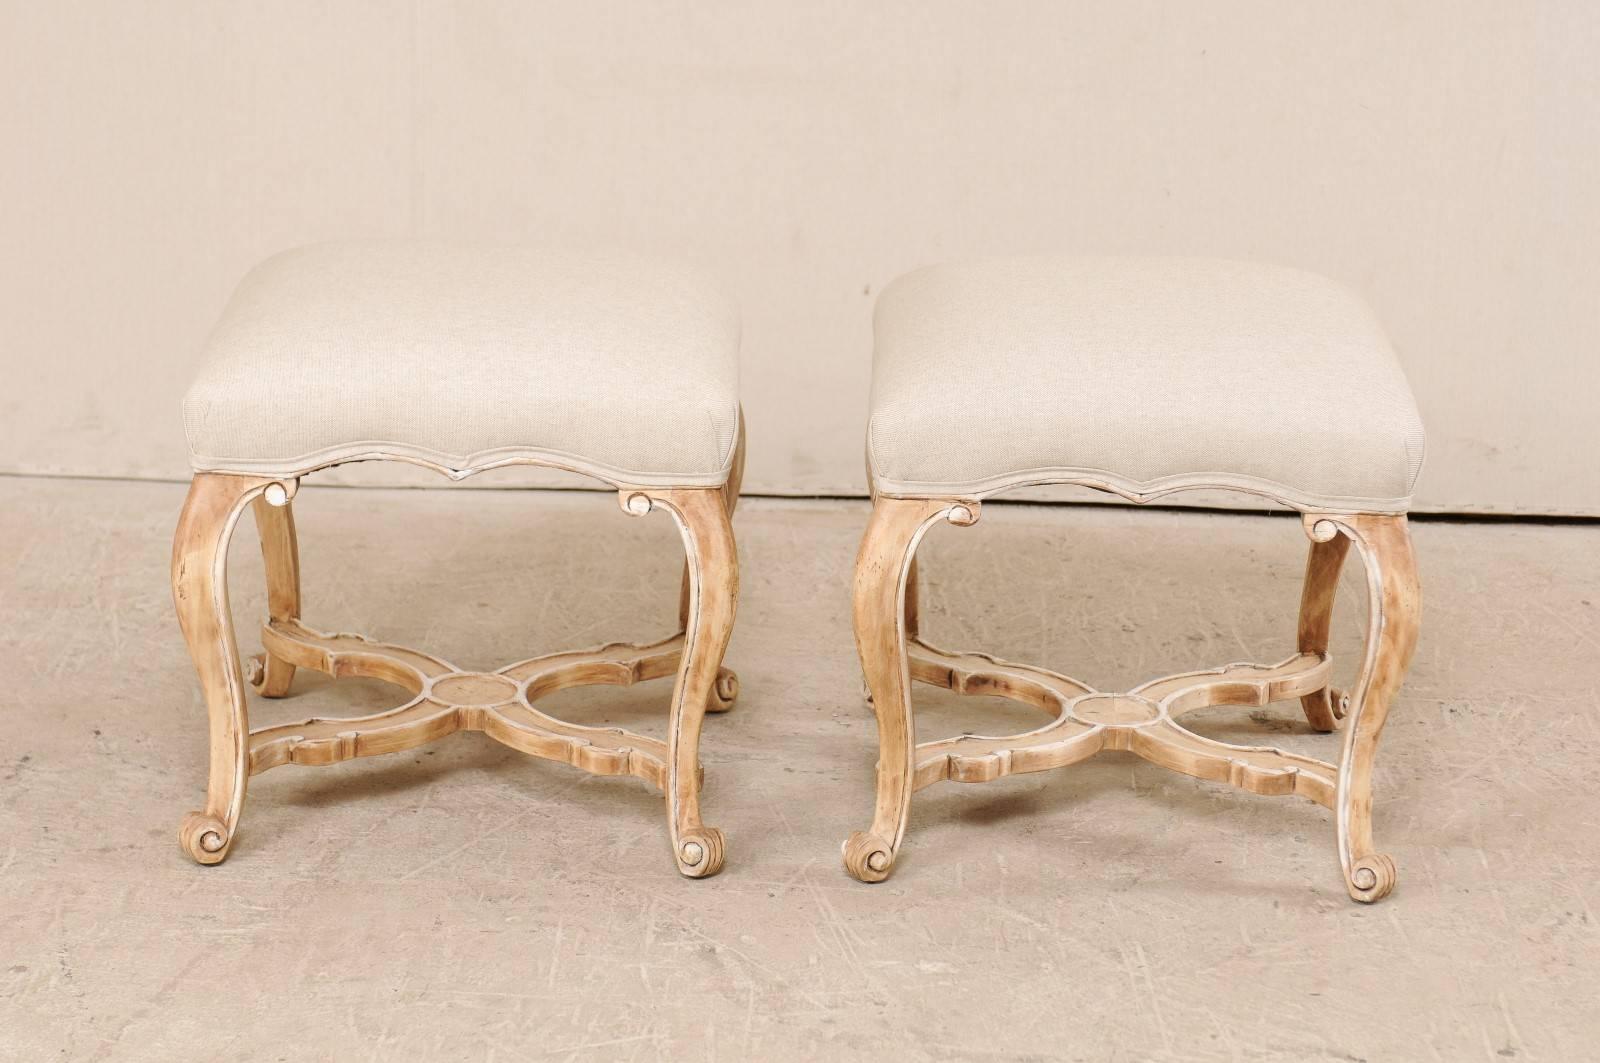 20th Century Pair of Carved Wood and Upholstered Stools with Cabriole Legs by Minton-Spidell